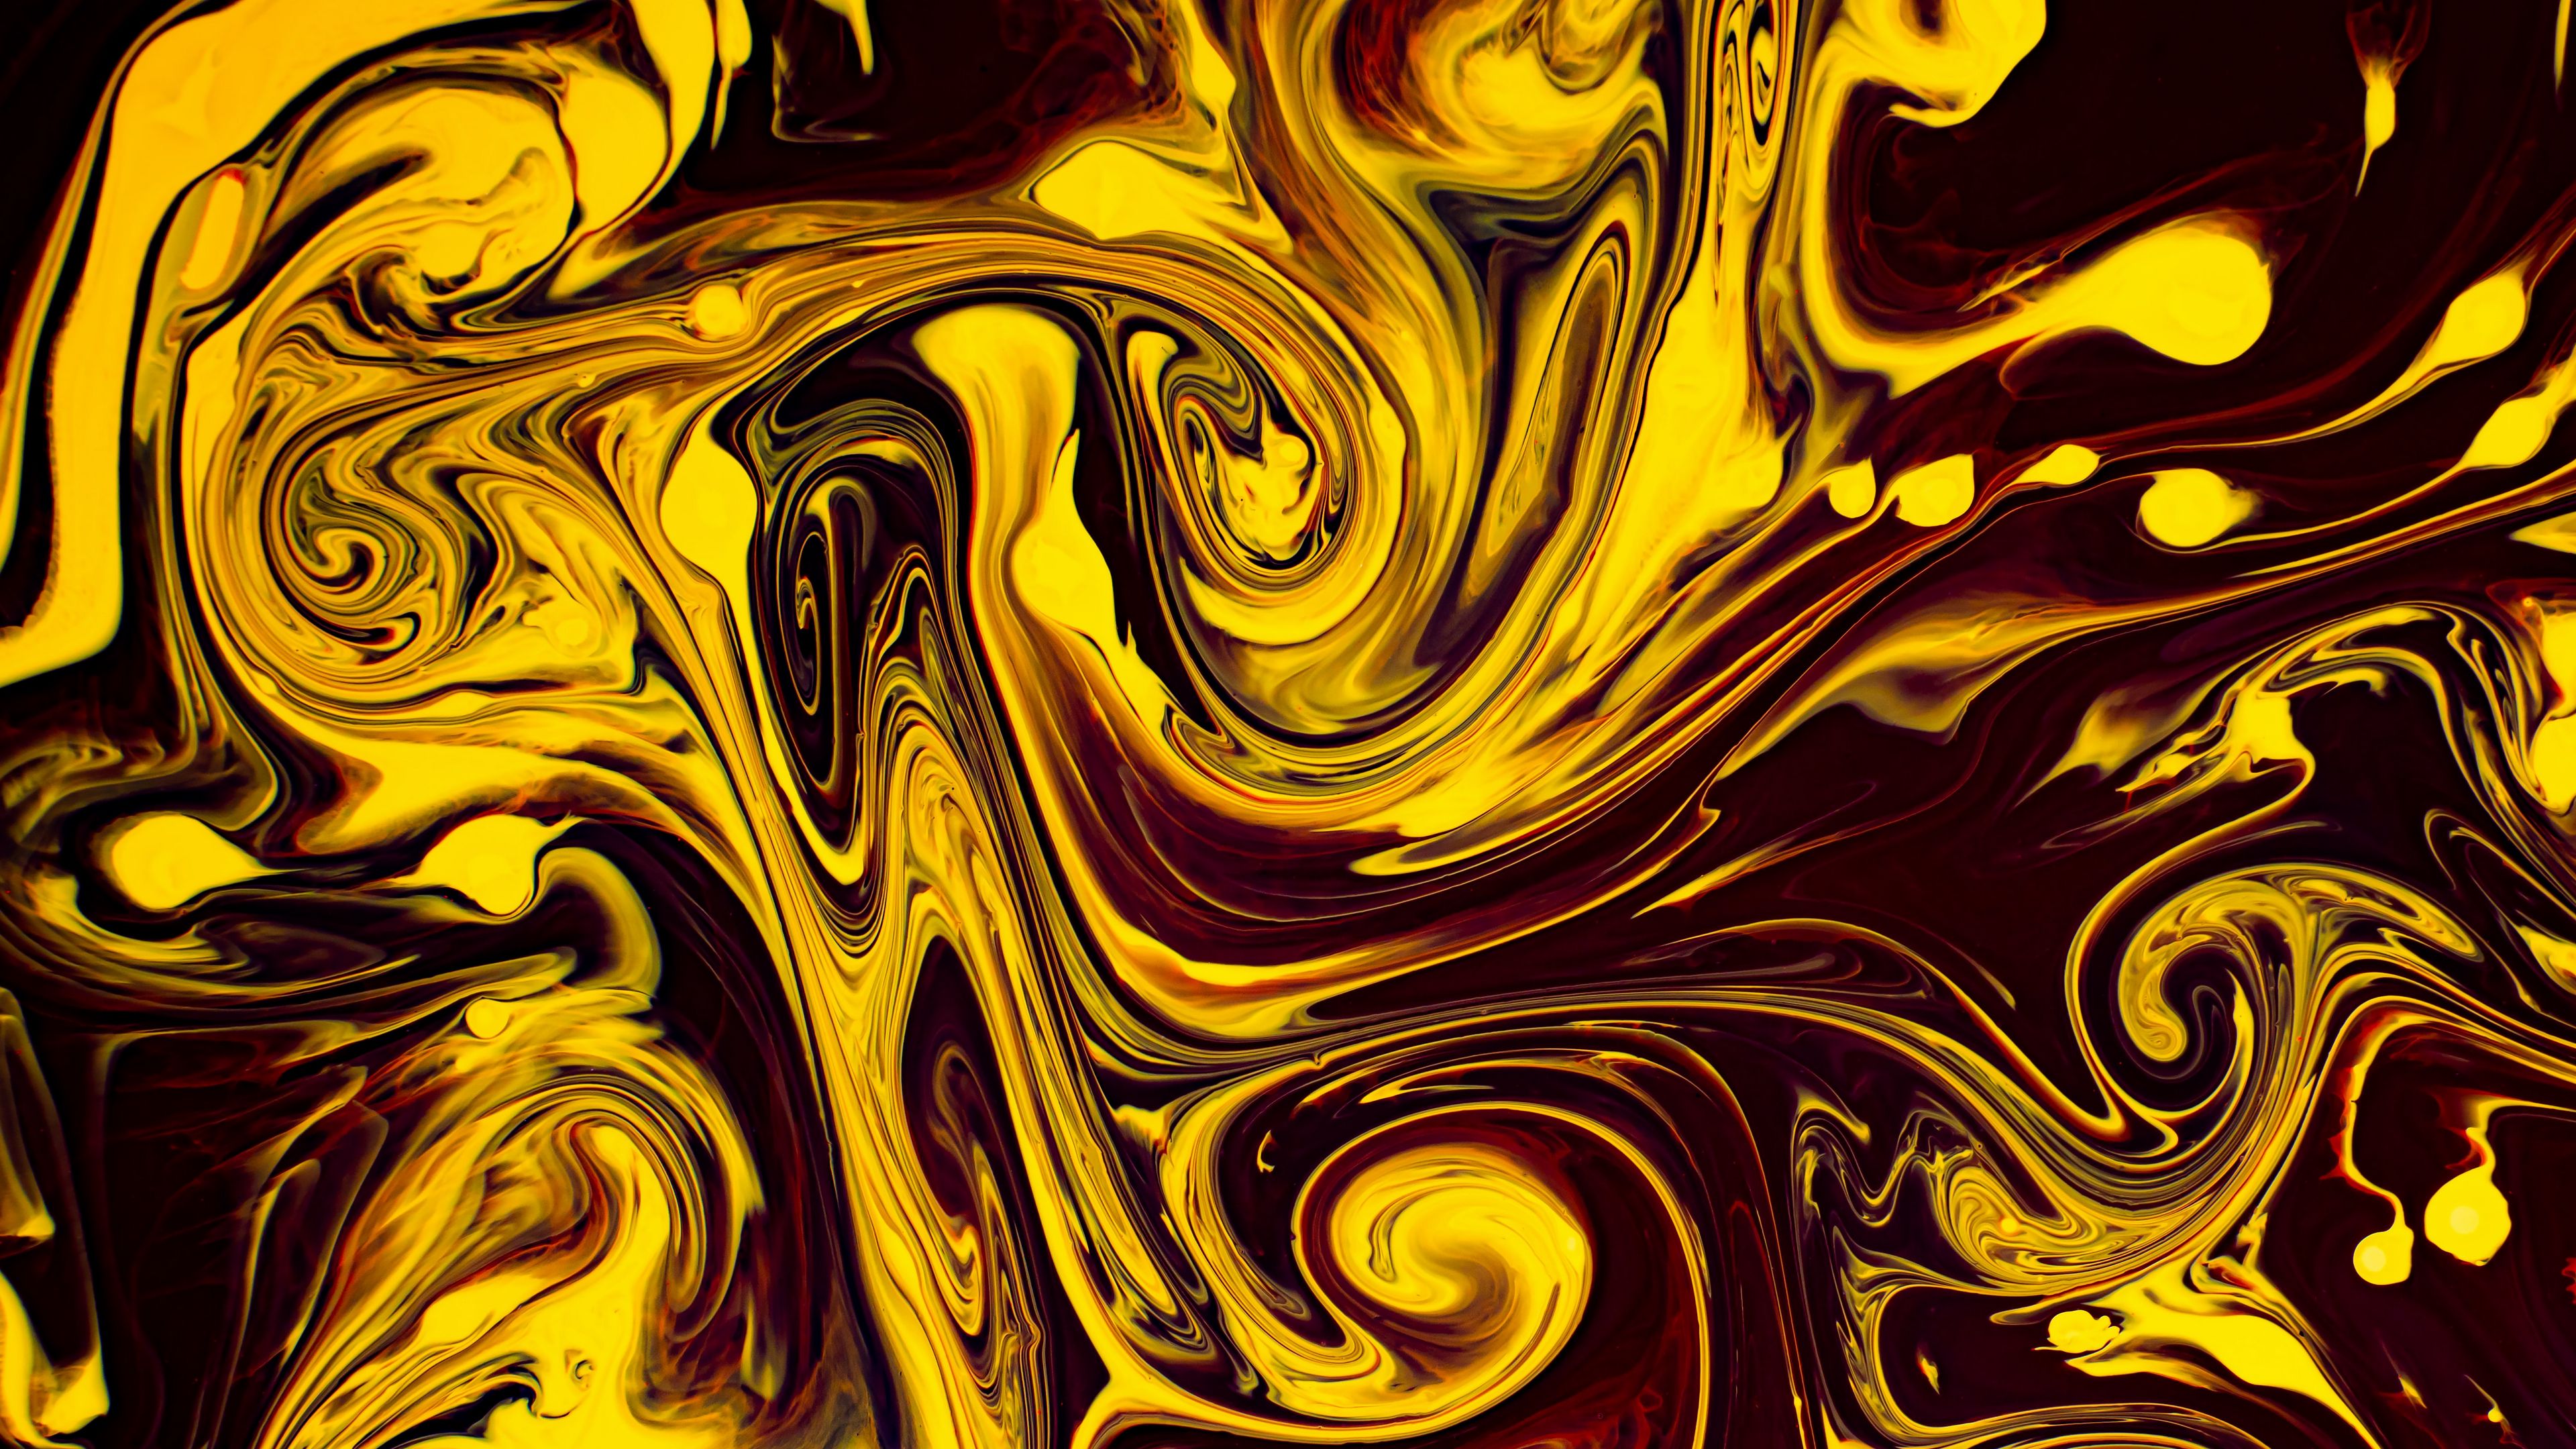 Paintwave Yellow Wallpapers | HD Wallpapers | ID #19451